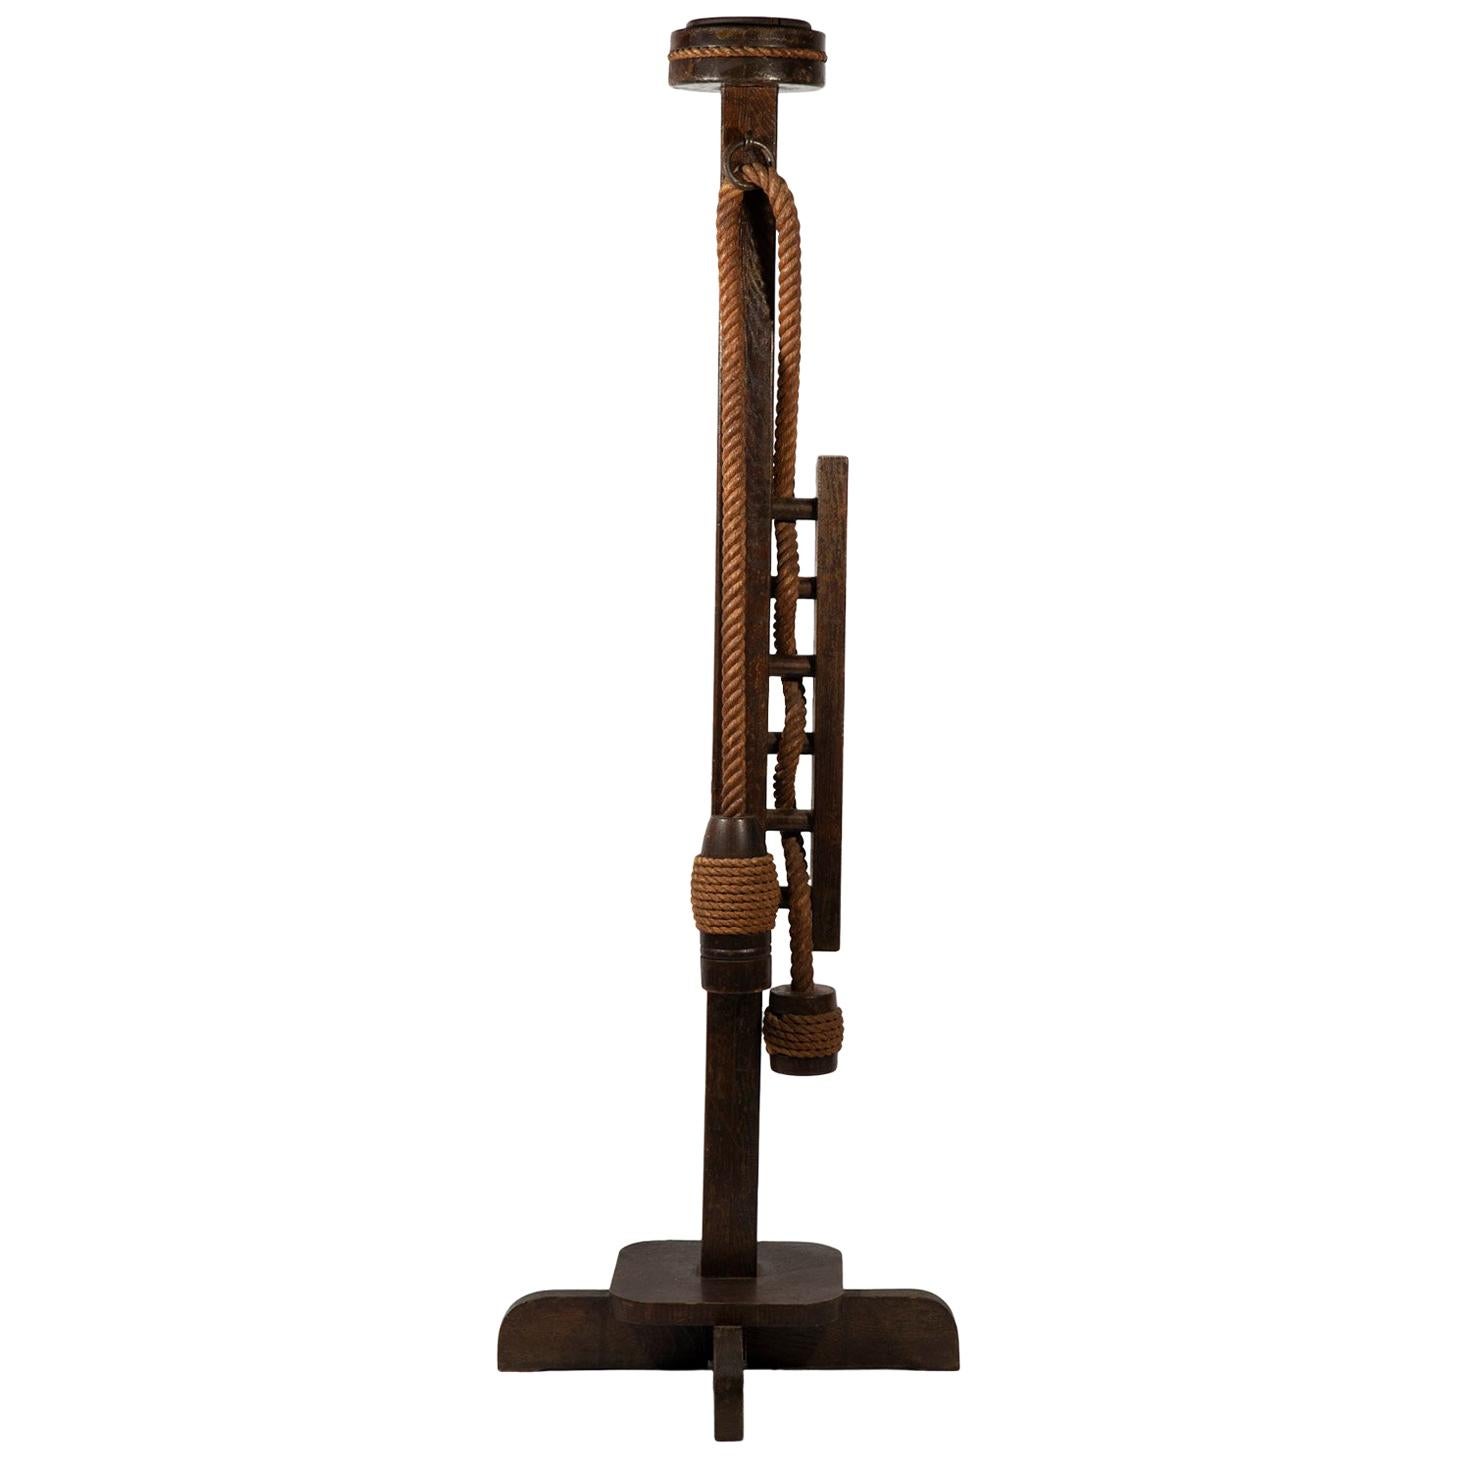 Audoux-Minet, Floor Lamp, Wood and Rope, circa 1950, France